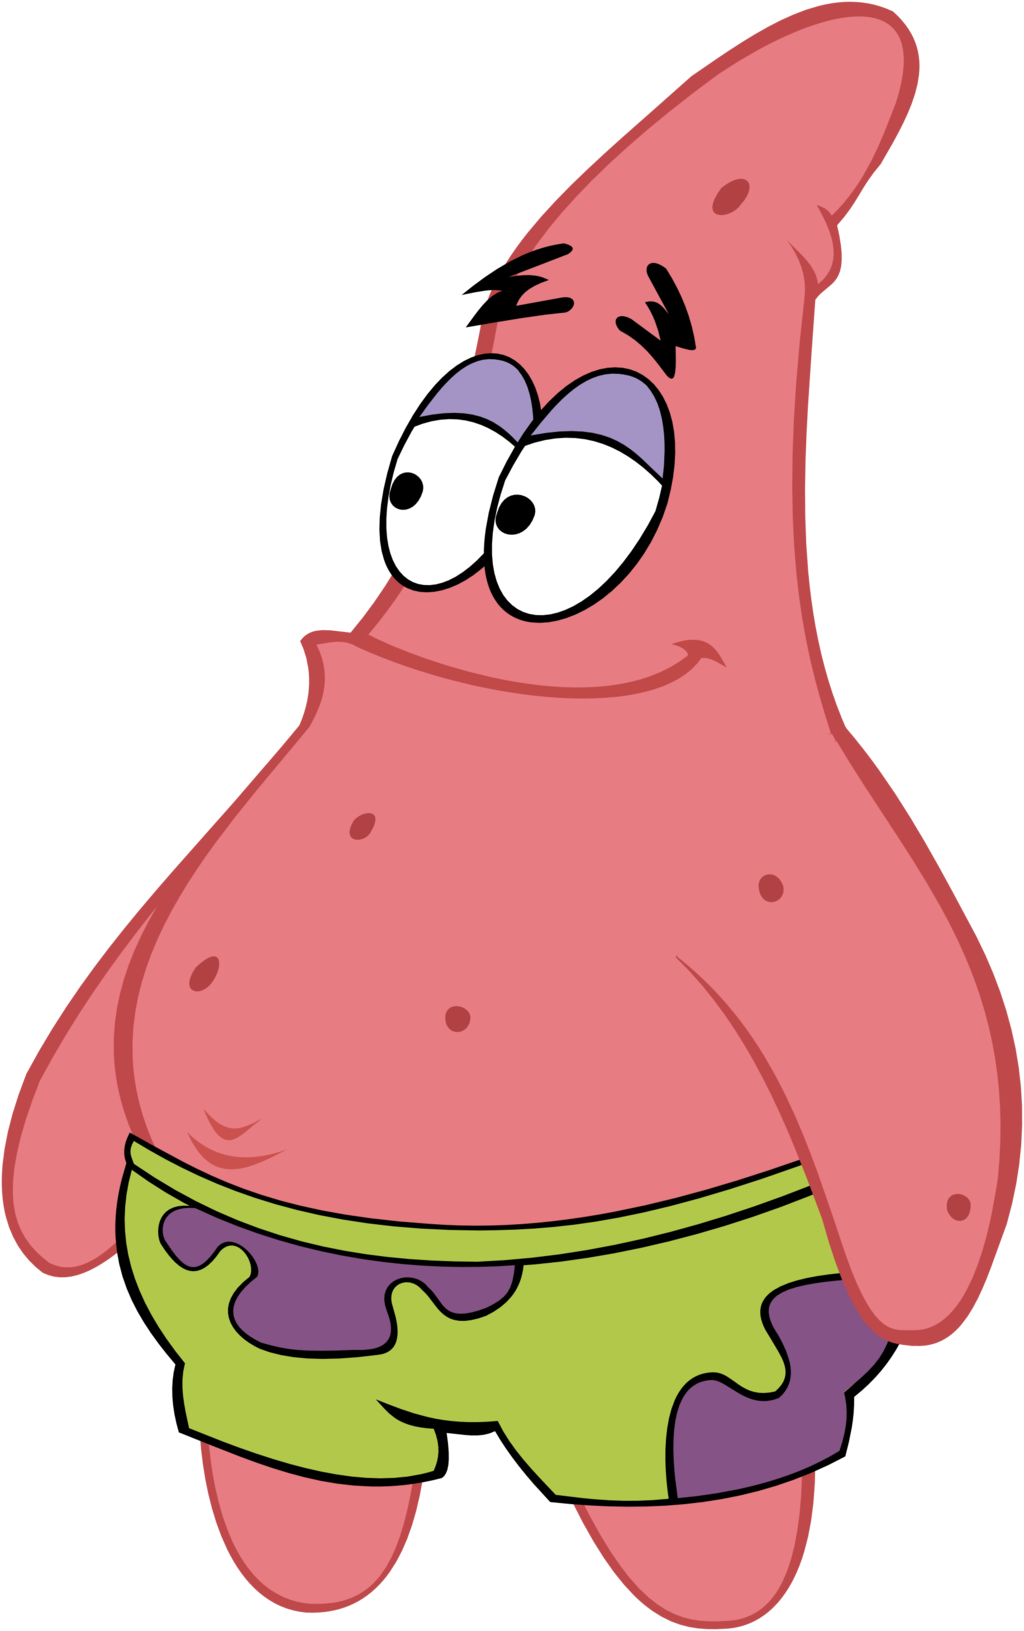 Free Patrick Star PNG Images with Transparent Backgrounds - FastPNG.com